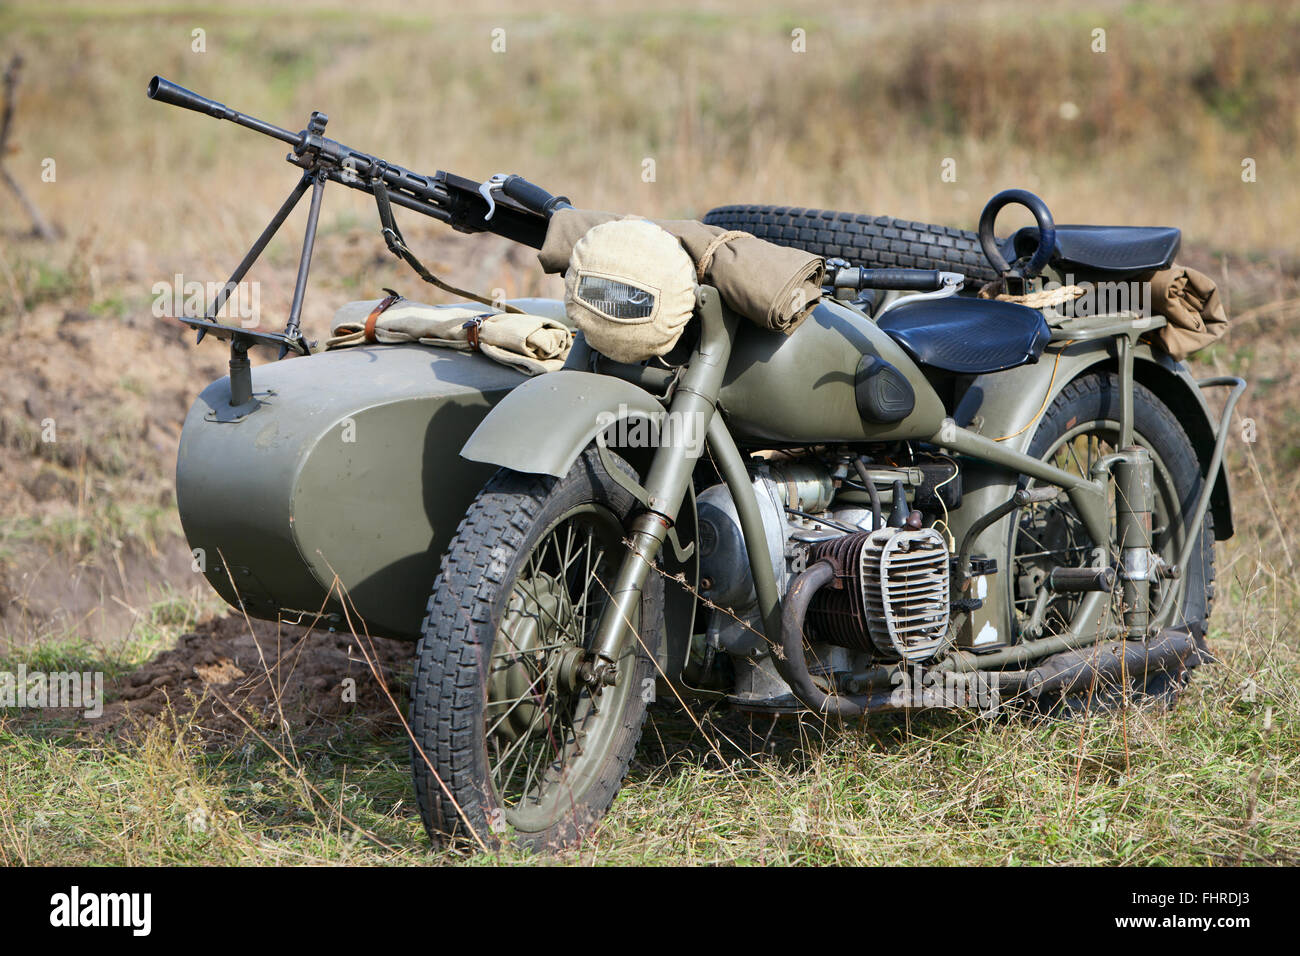 Old military motorcycle Stock Photo - Alamy